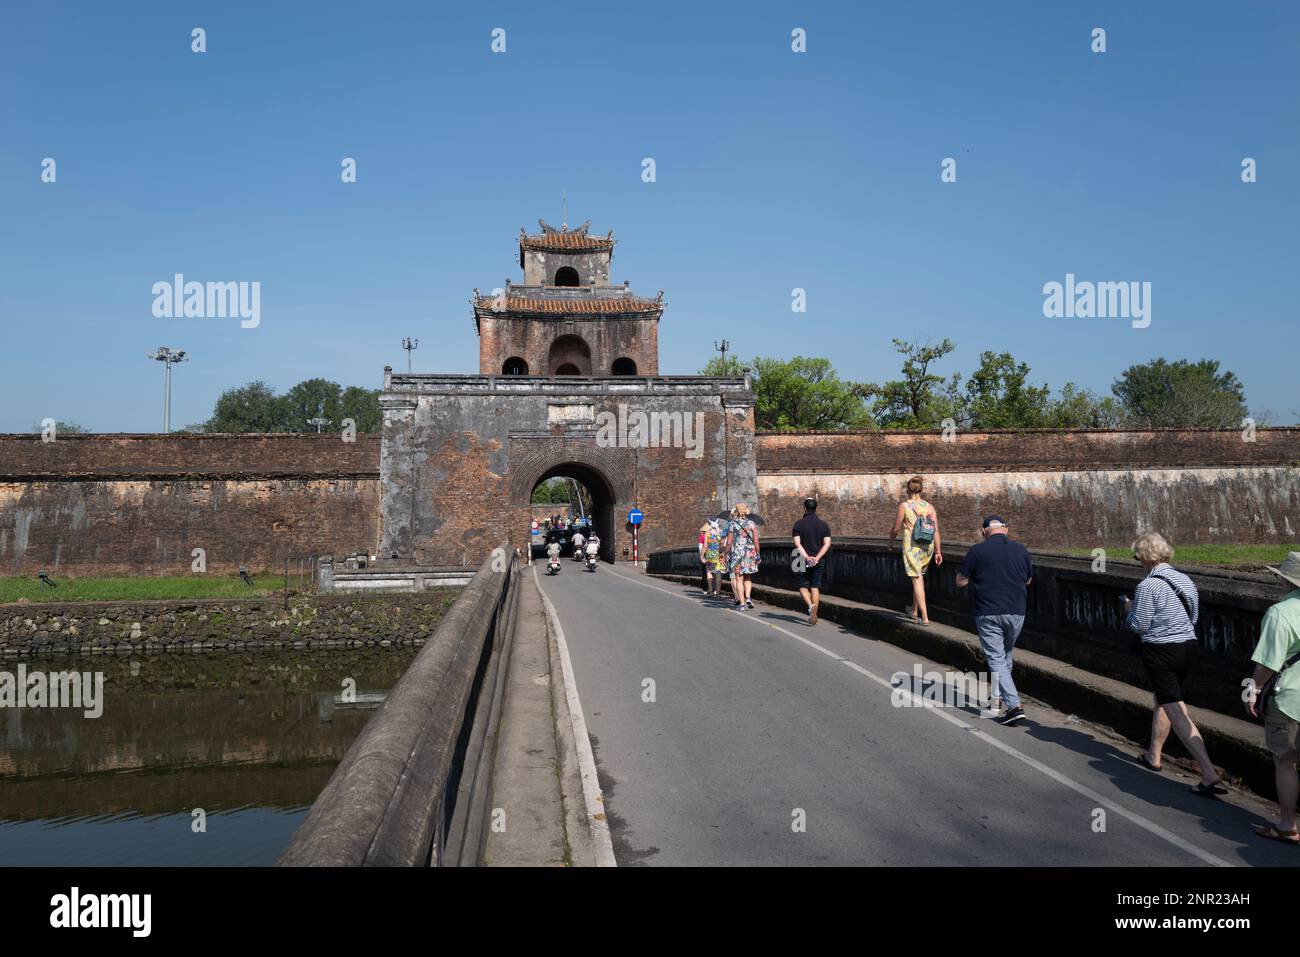 The Imerial city of Huế, Vietnam that includes the Imperial City and ancient burial sites. Tourists flock to view the sites and to be seen and  Photog Stock Photo